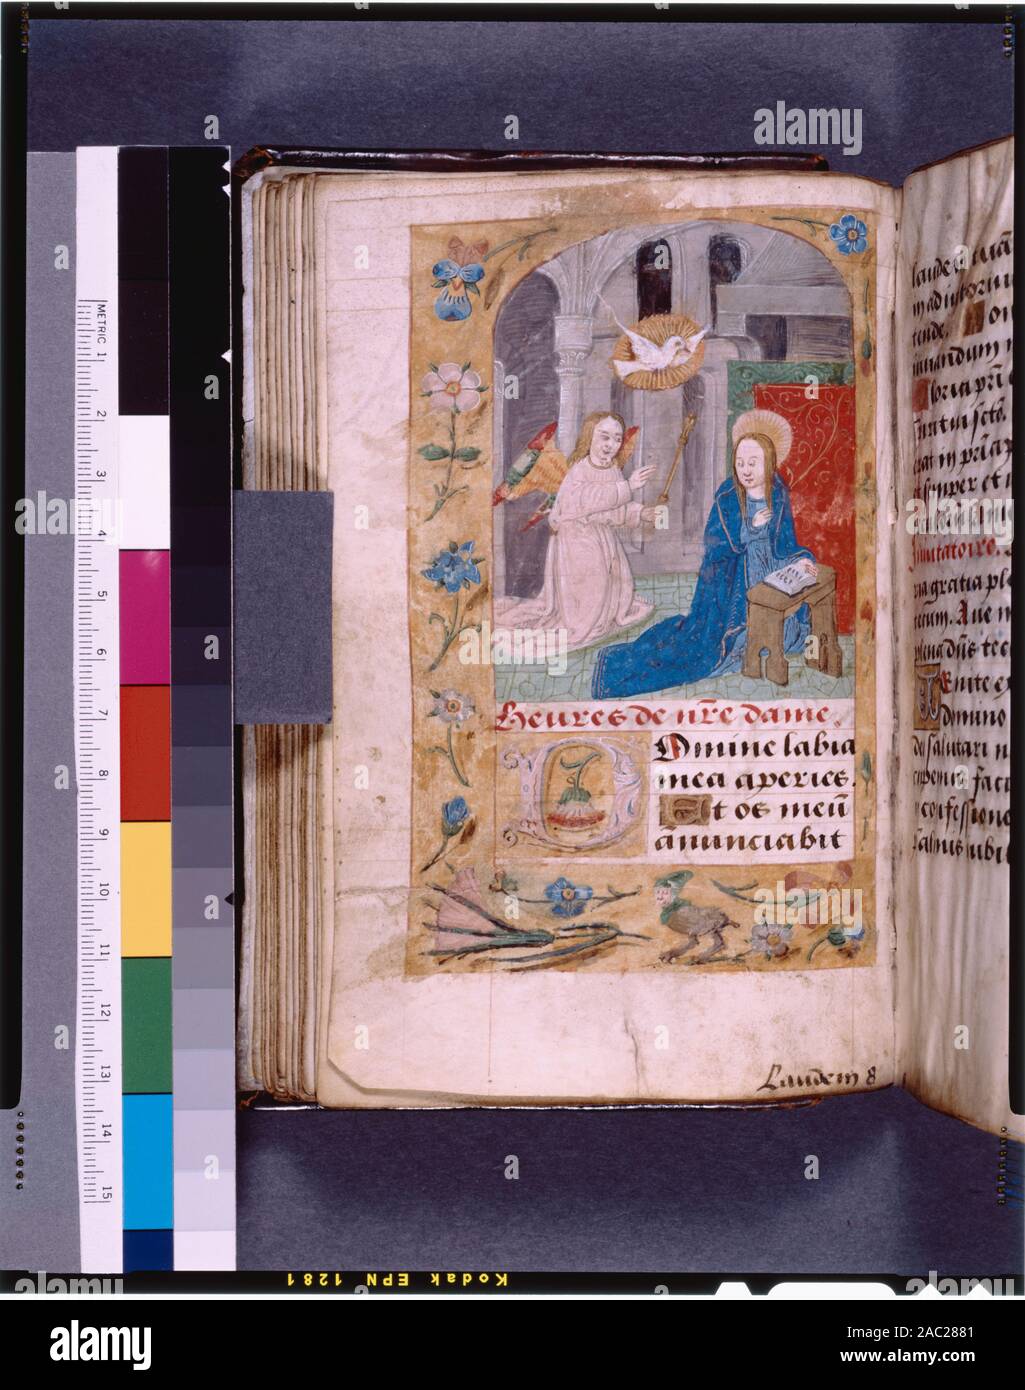 Full-page miniature of Annunciation, with border including grotesques 4-line initial, placemarker and smaller initial, rubric in French, catchword Listed in De Ricci, Seymour, Census of Medieval and Renaissance Manuscripts in the United States and Canada. New York. N.Y.: H.W. Wilson, 1935; and Supplement, New York, N.Y.: Bibliographical Society of America, 1962. Ownership : Note on f.1:  Desiderius Galiotus notarius civis Bisuntinus huiusmodi libellum praecum Joannae Gigouber uxori suae emit Bisuntii 17 Martii 1572.  Felix M. Warburg collection, bequeathed 1937. De Ricci, 1851.  De Ricci, Supp Stock Photo